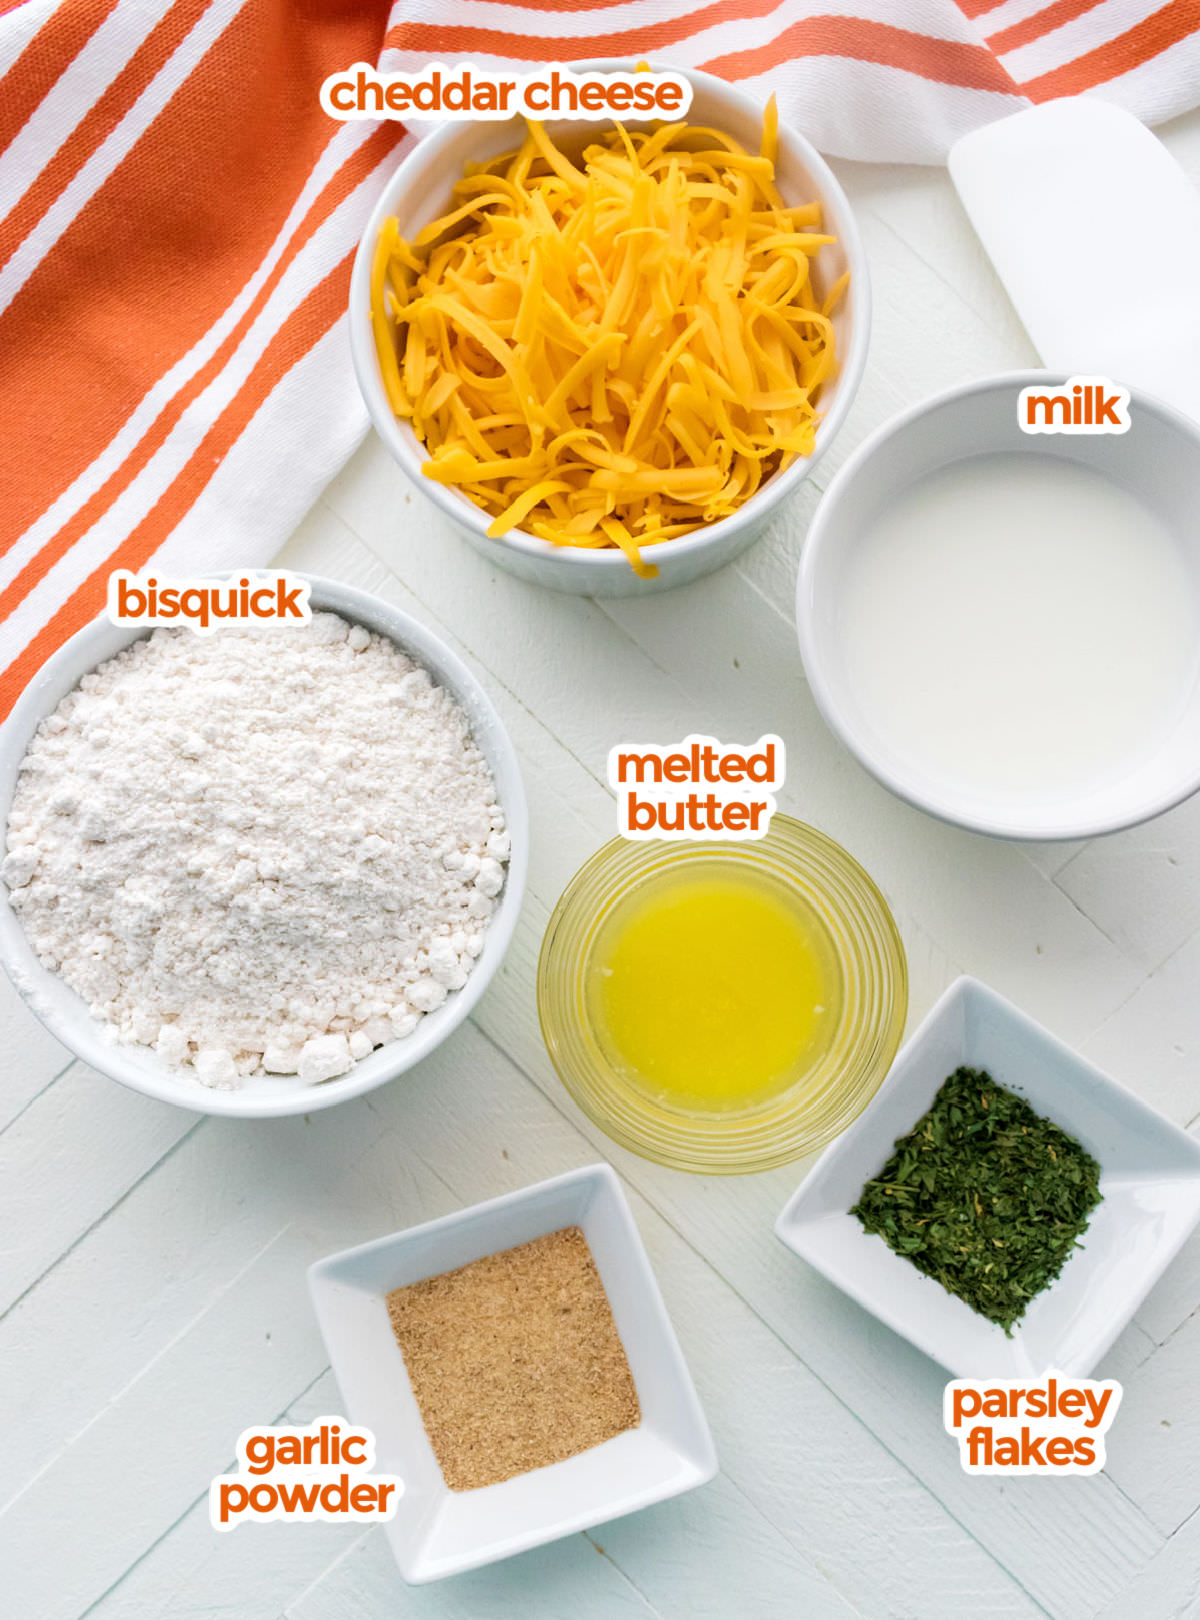 All the ingredients you will need to make Cheese Garlic Biscuits including  Bisquick, Cheddar Cheese, Milk, Melted Butter, Parsley Flakes and Garlic Powder.